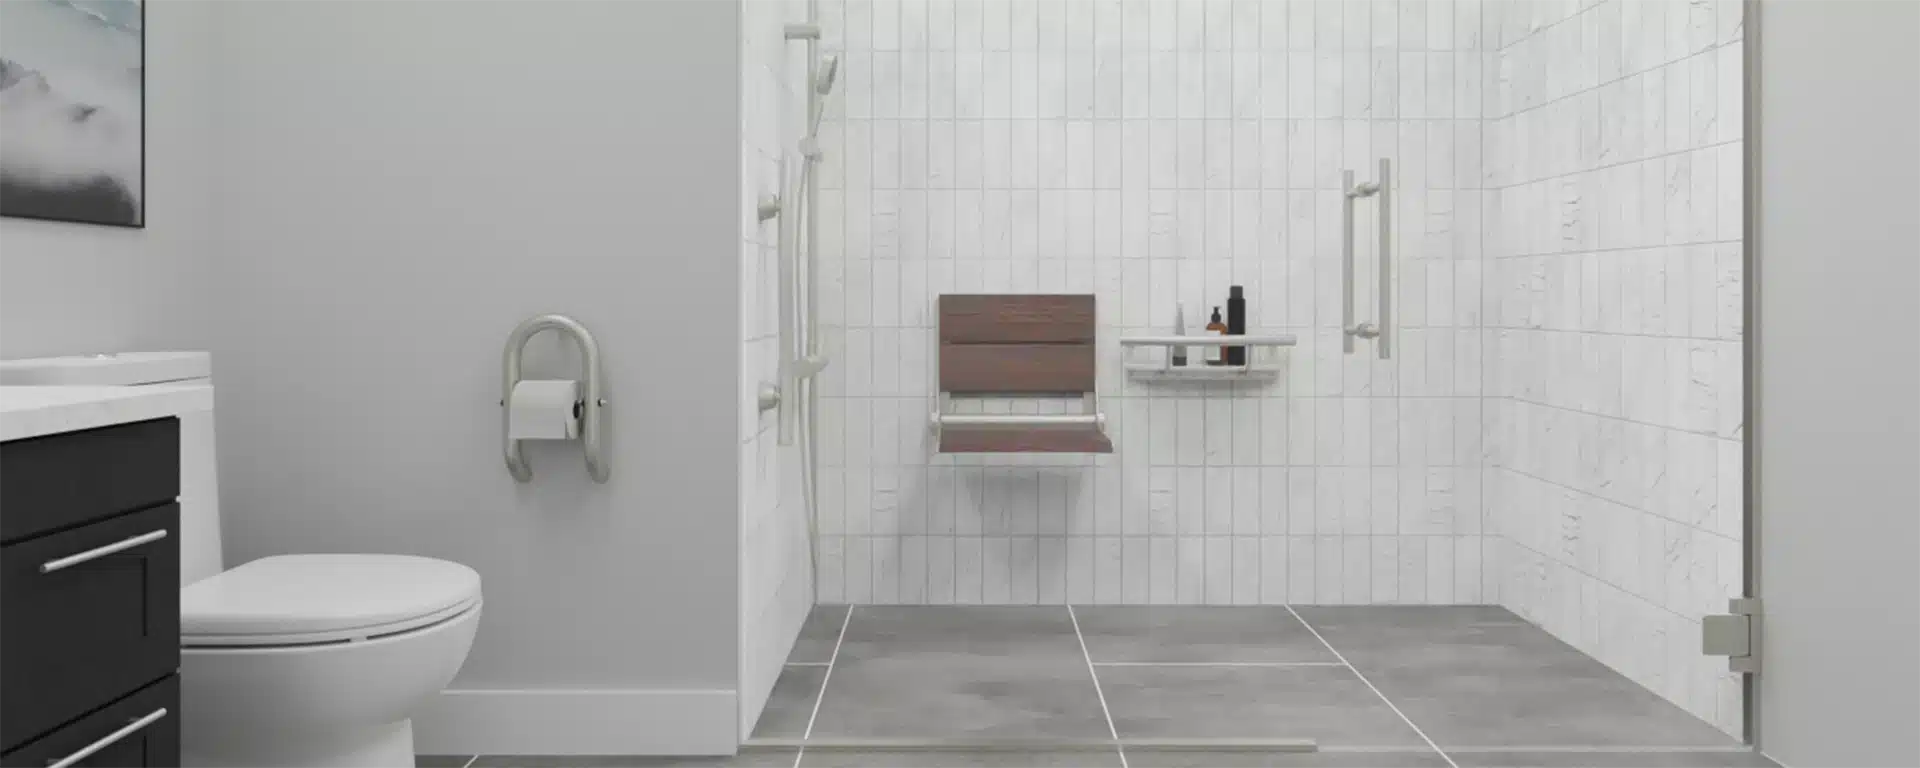 A washroom with 2-in-1 safety accessories.